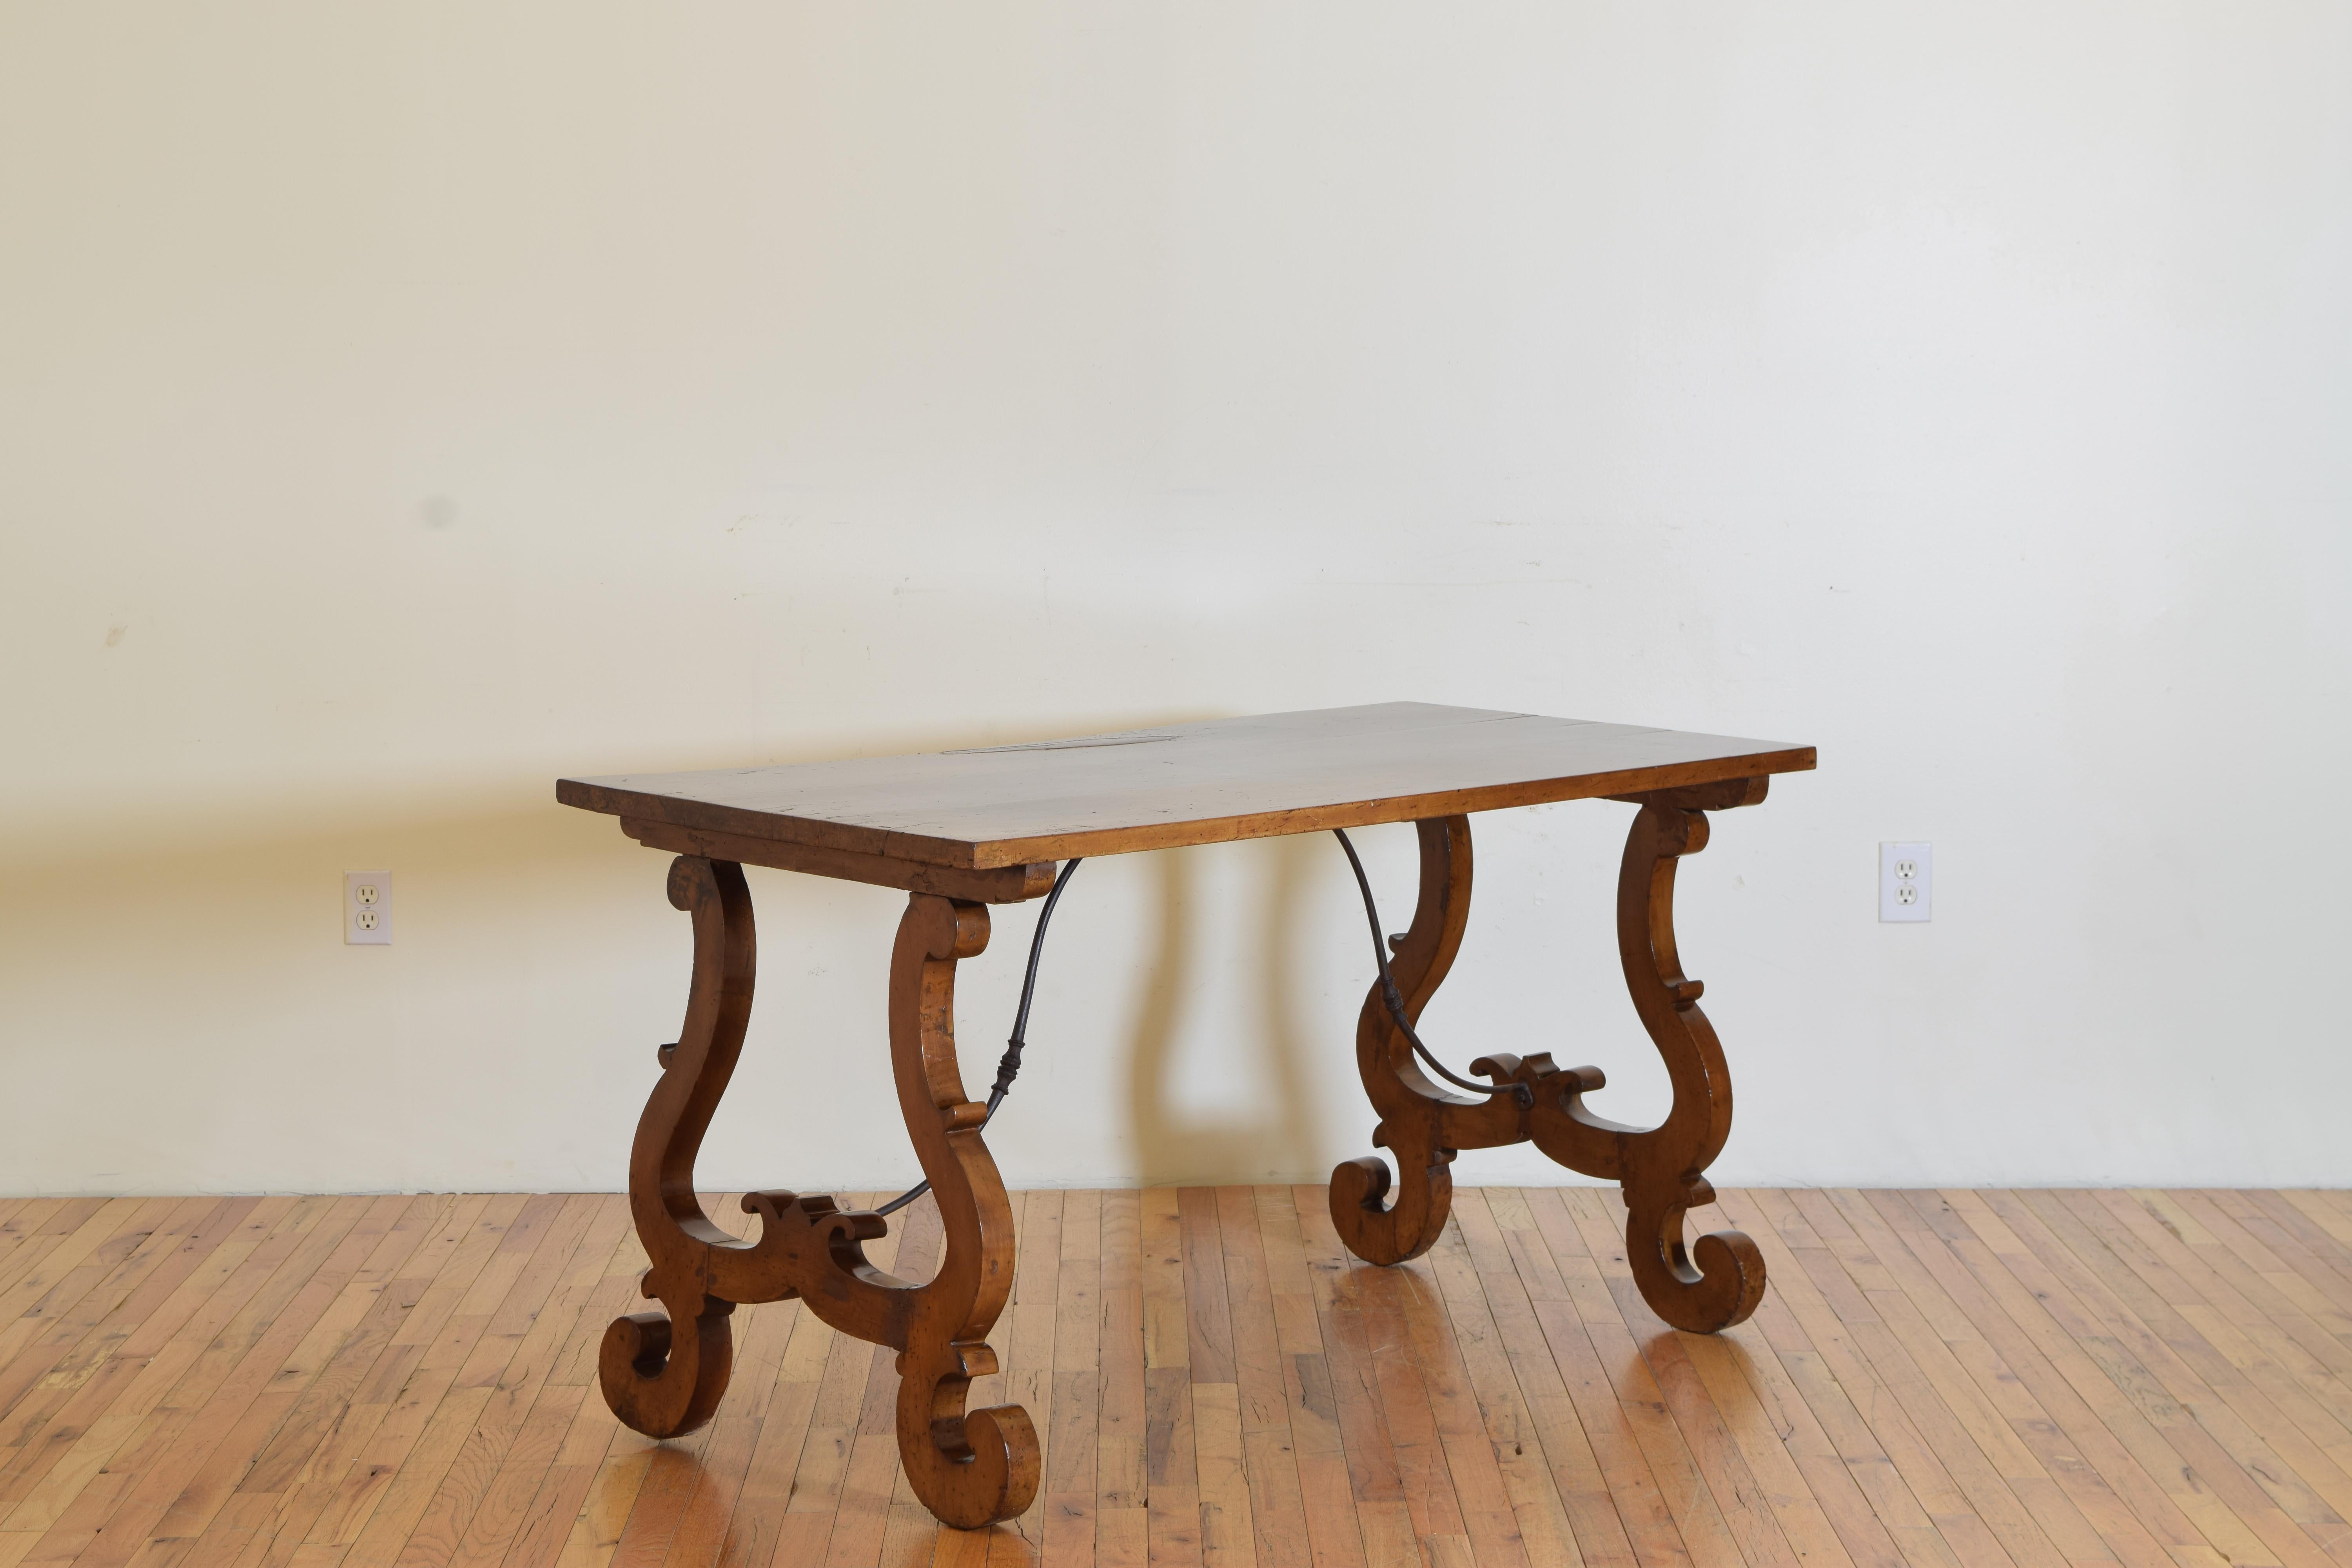 The rectangular top with a distinguishing raised burl supported by elegantly shaped legs and braced by iron stretchers.